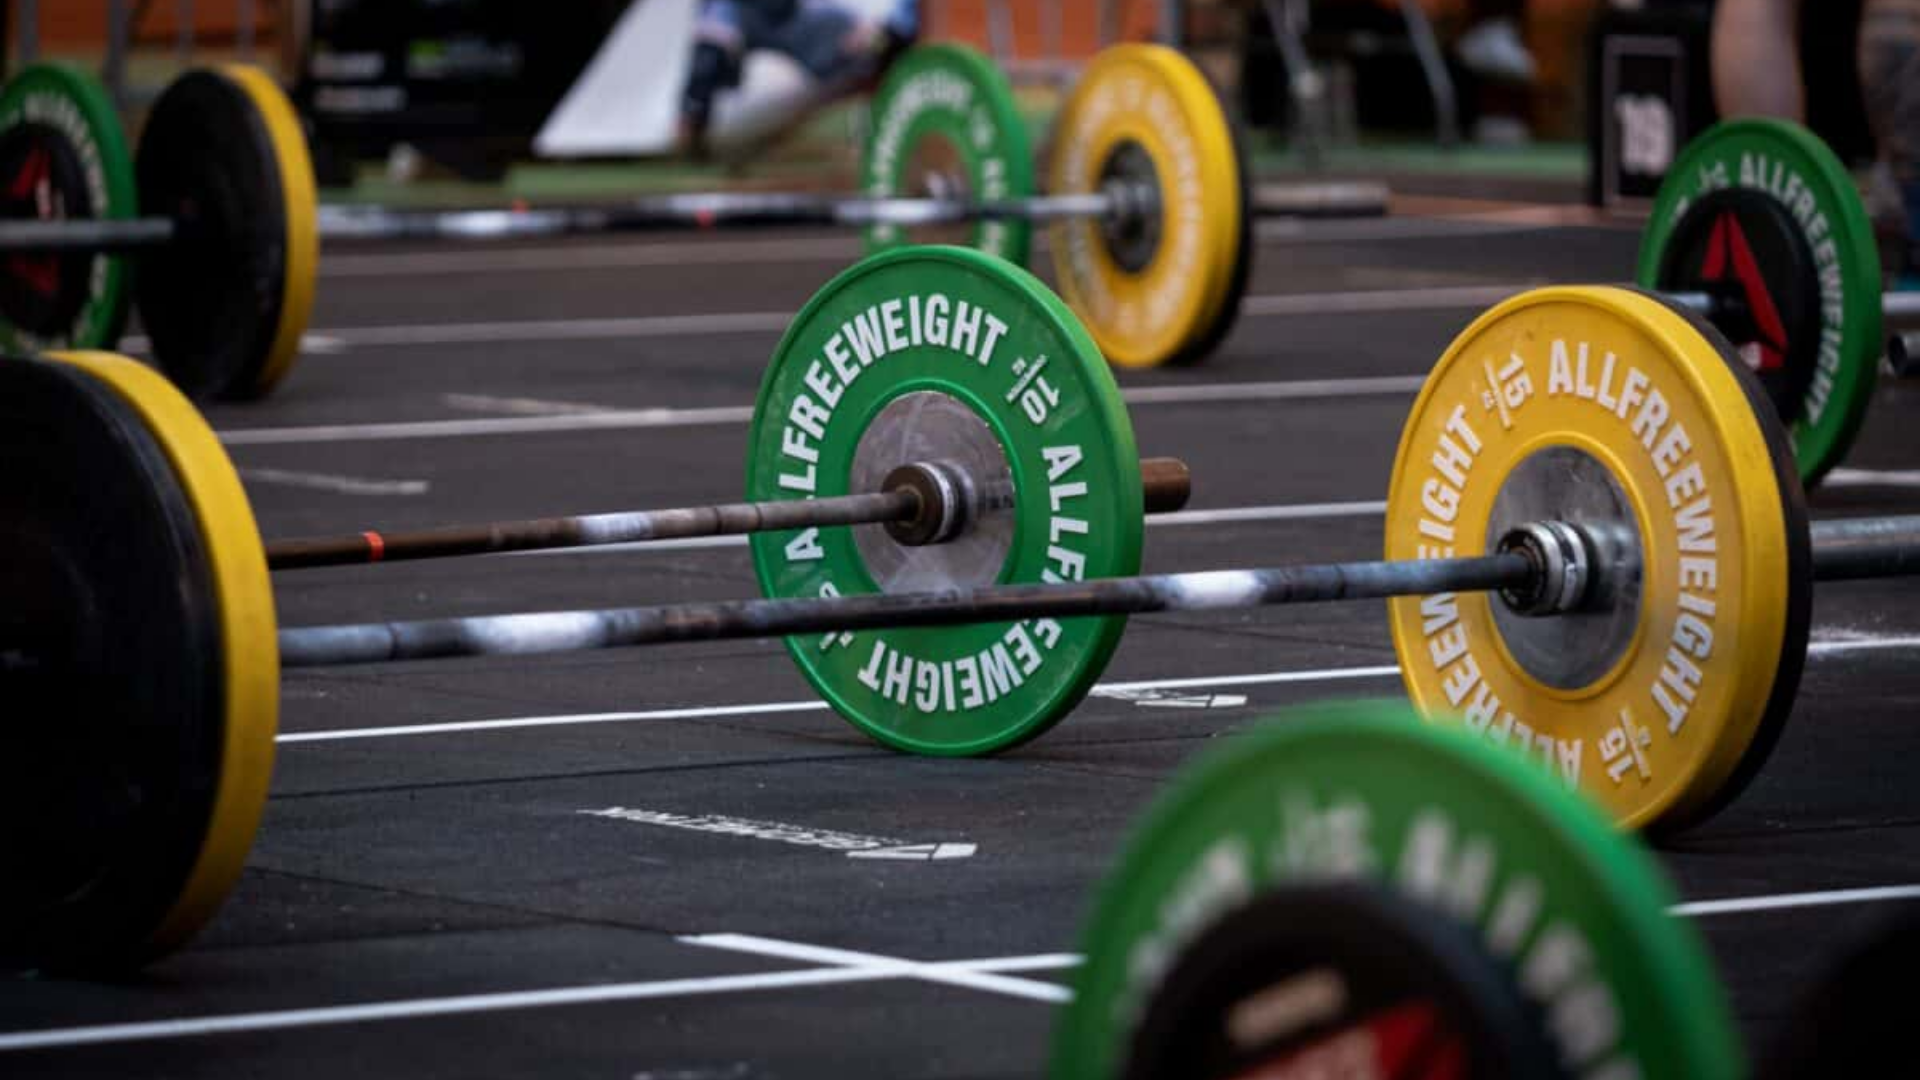 Olympic bars in a Crossfit session